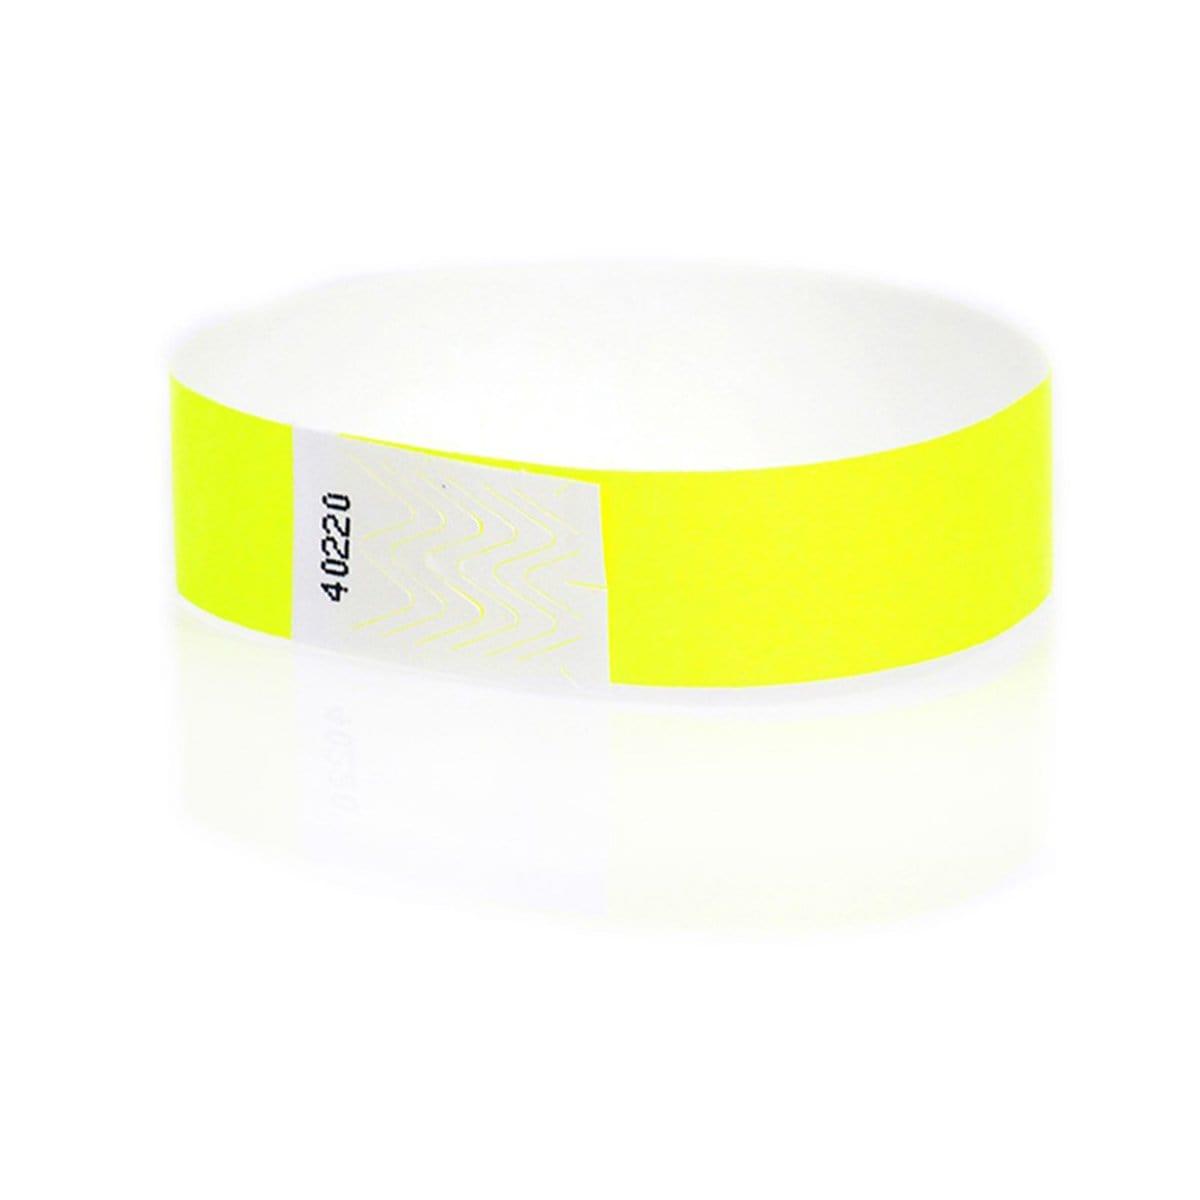 Buy Party Supplies Wristband Supertek 3/4in Yellow Glow 500 Pkg. sold at Party Expert